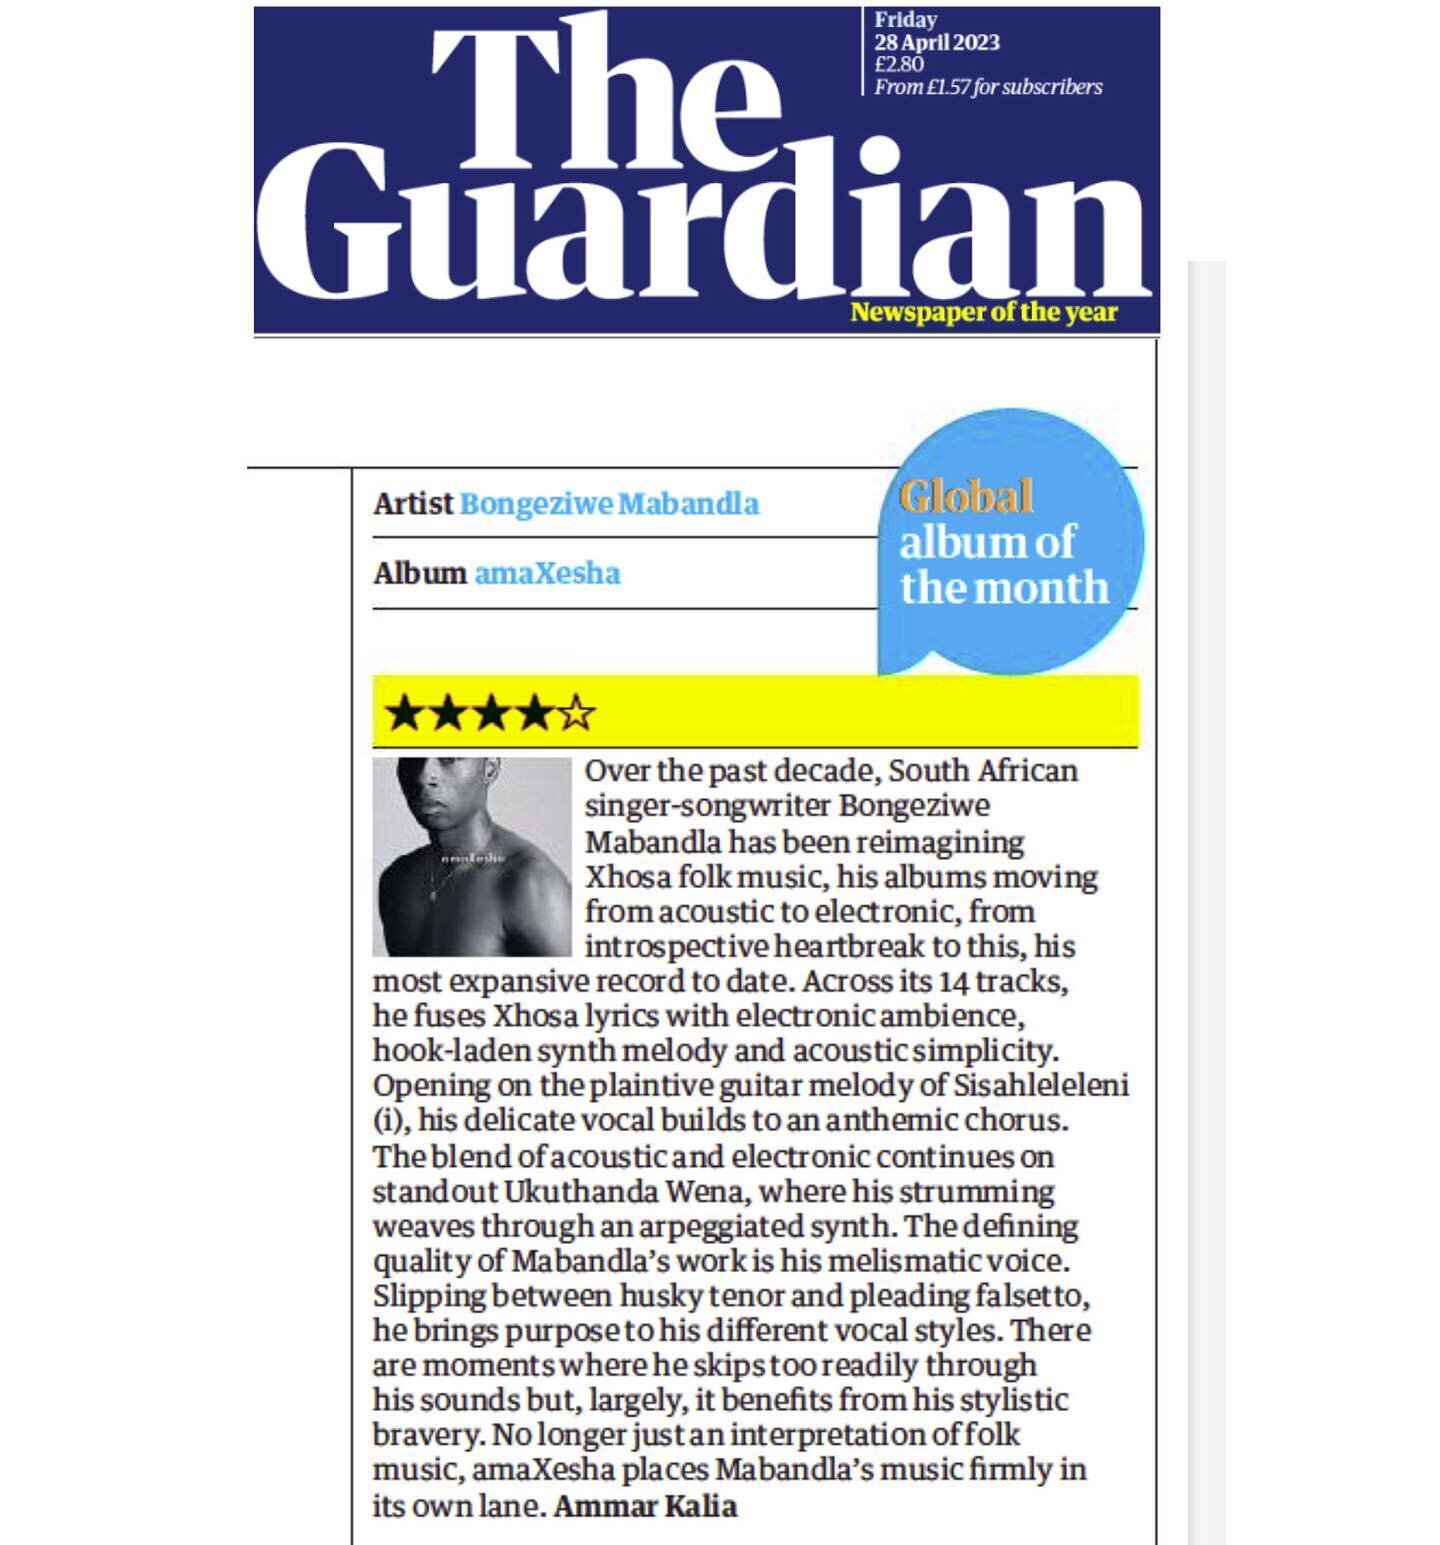 Bongeziwe Mabandla's sublime new album &quot;amaXesha&quot;was made &quot;Global Album of the month&quot; in @guardian today... &quot;The singer-songwriter elevates his reimagining of Xhosa folk music with synth-pop hooks and his melismatic voice&quo